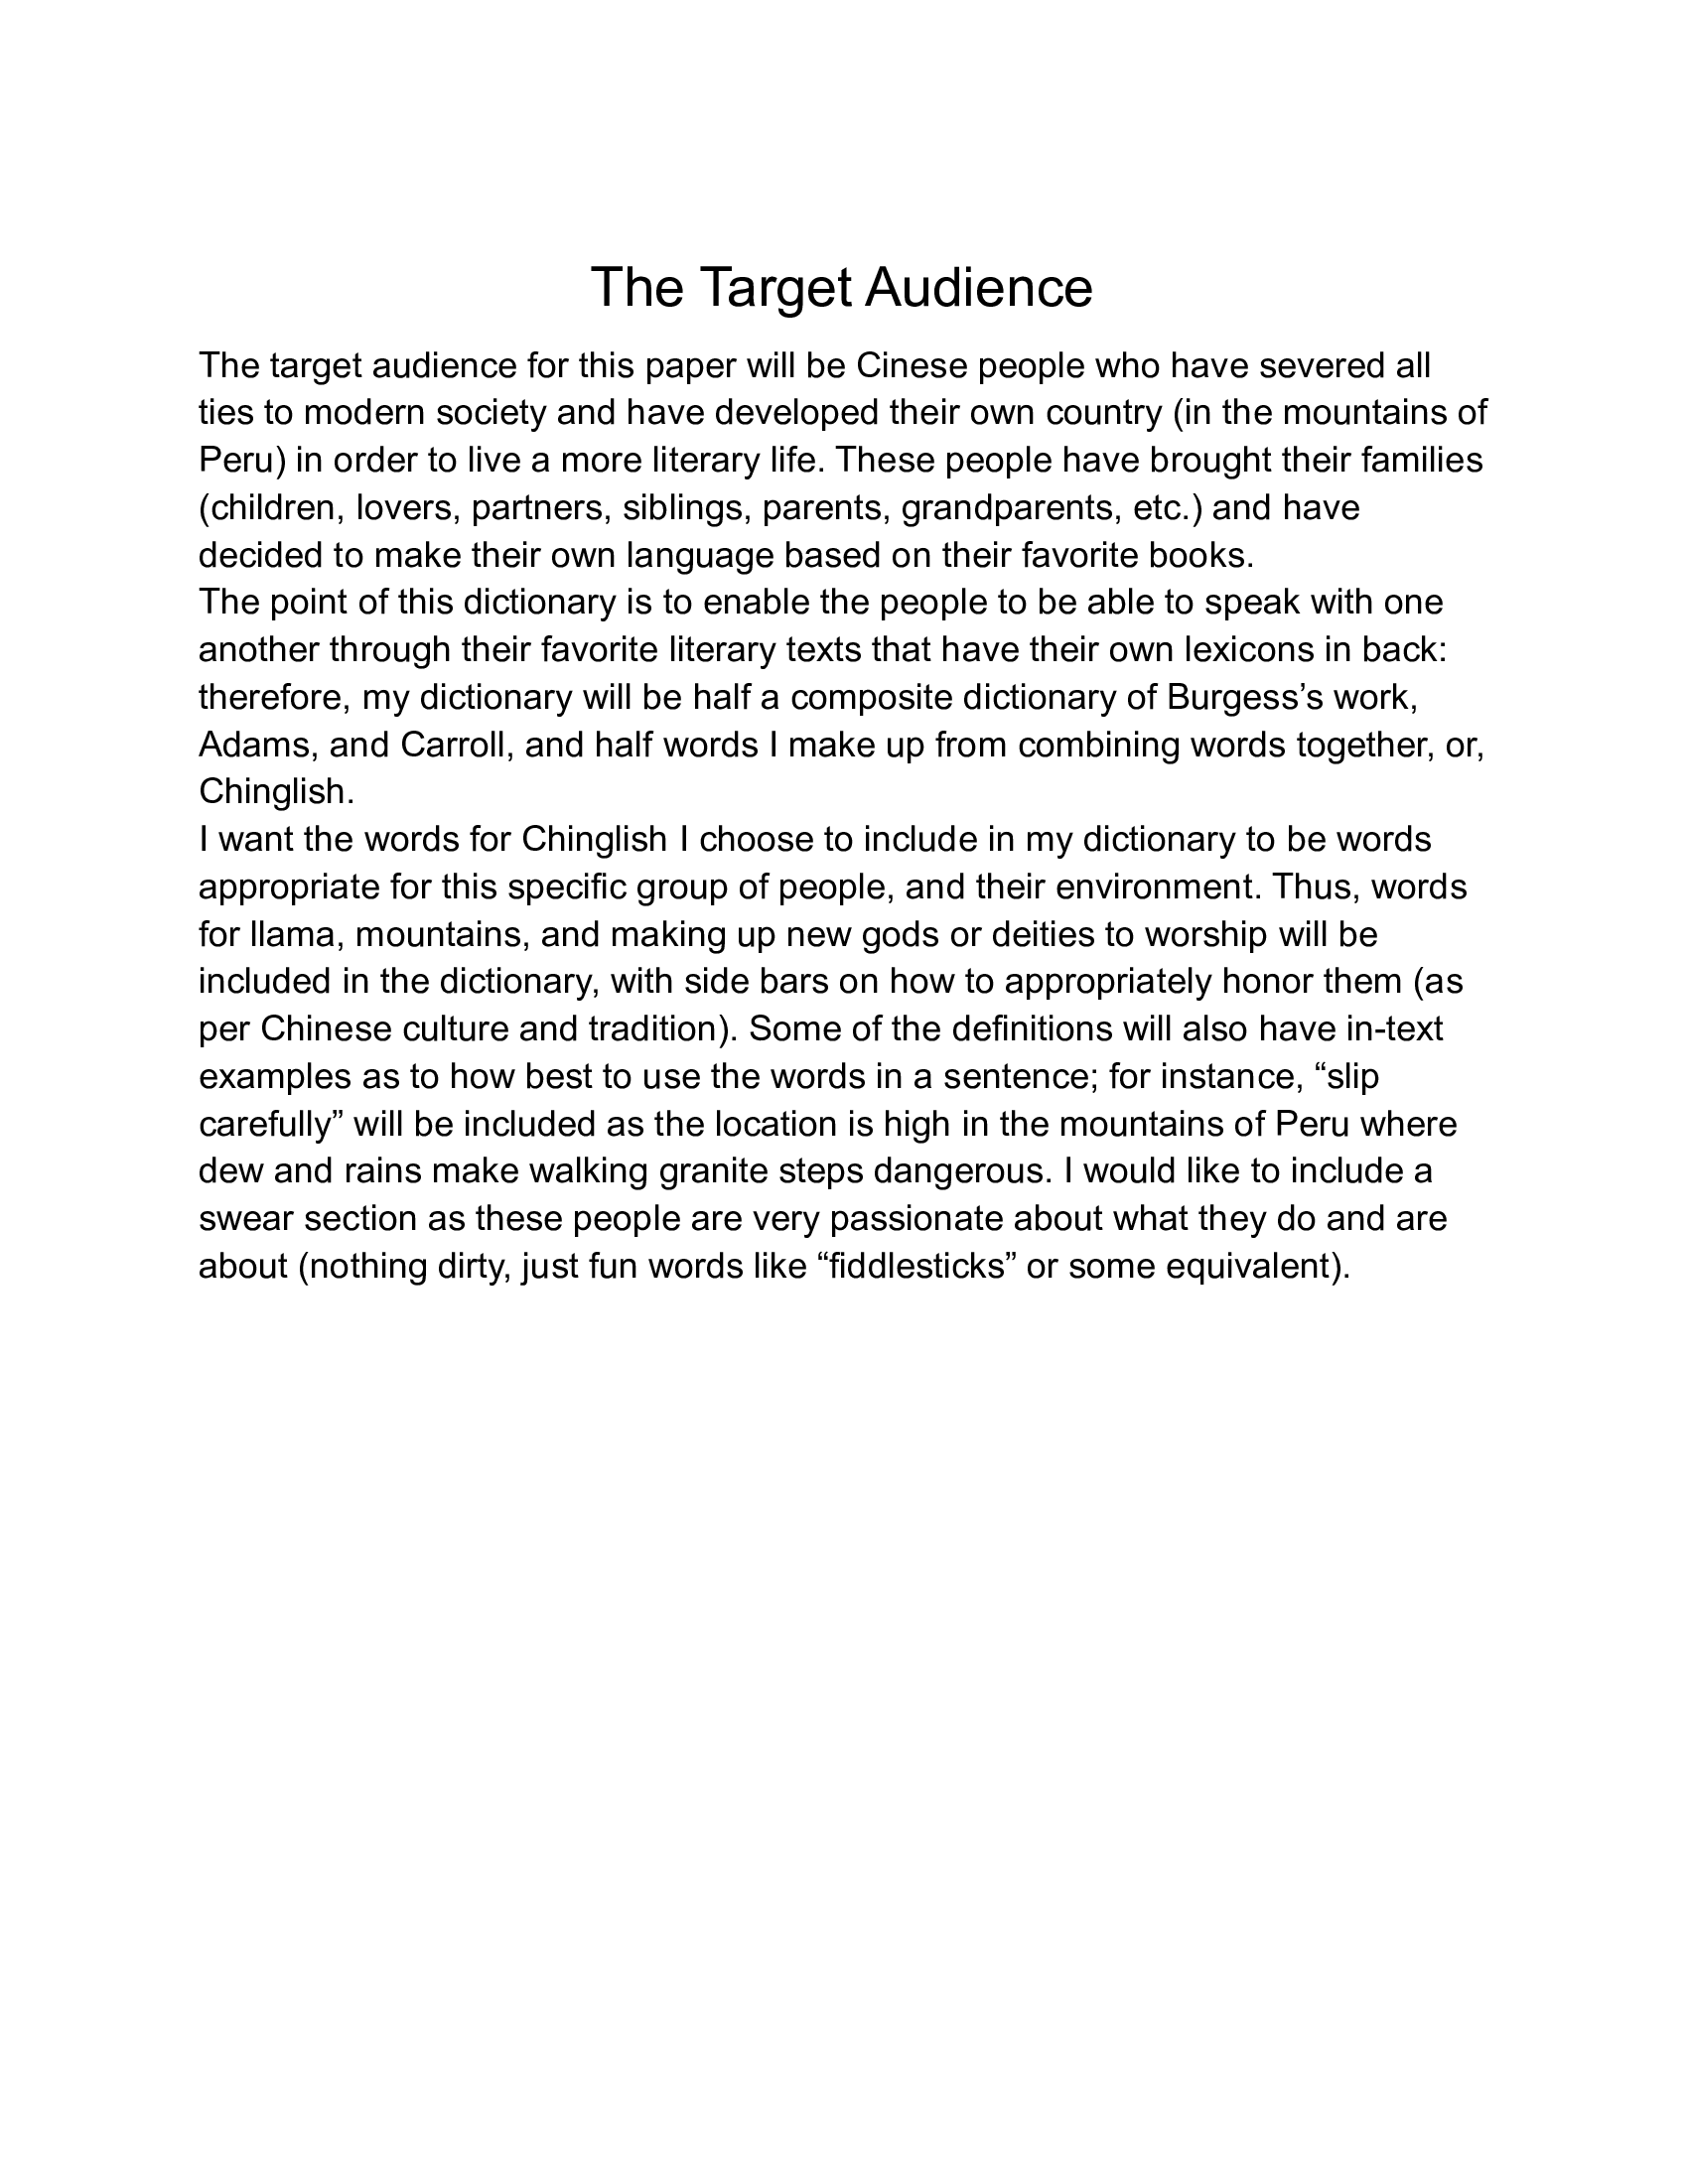 essay writing on target audience